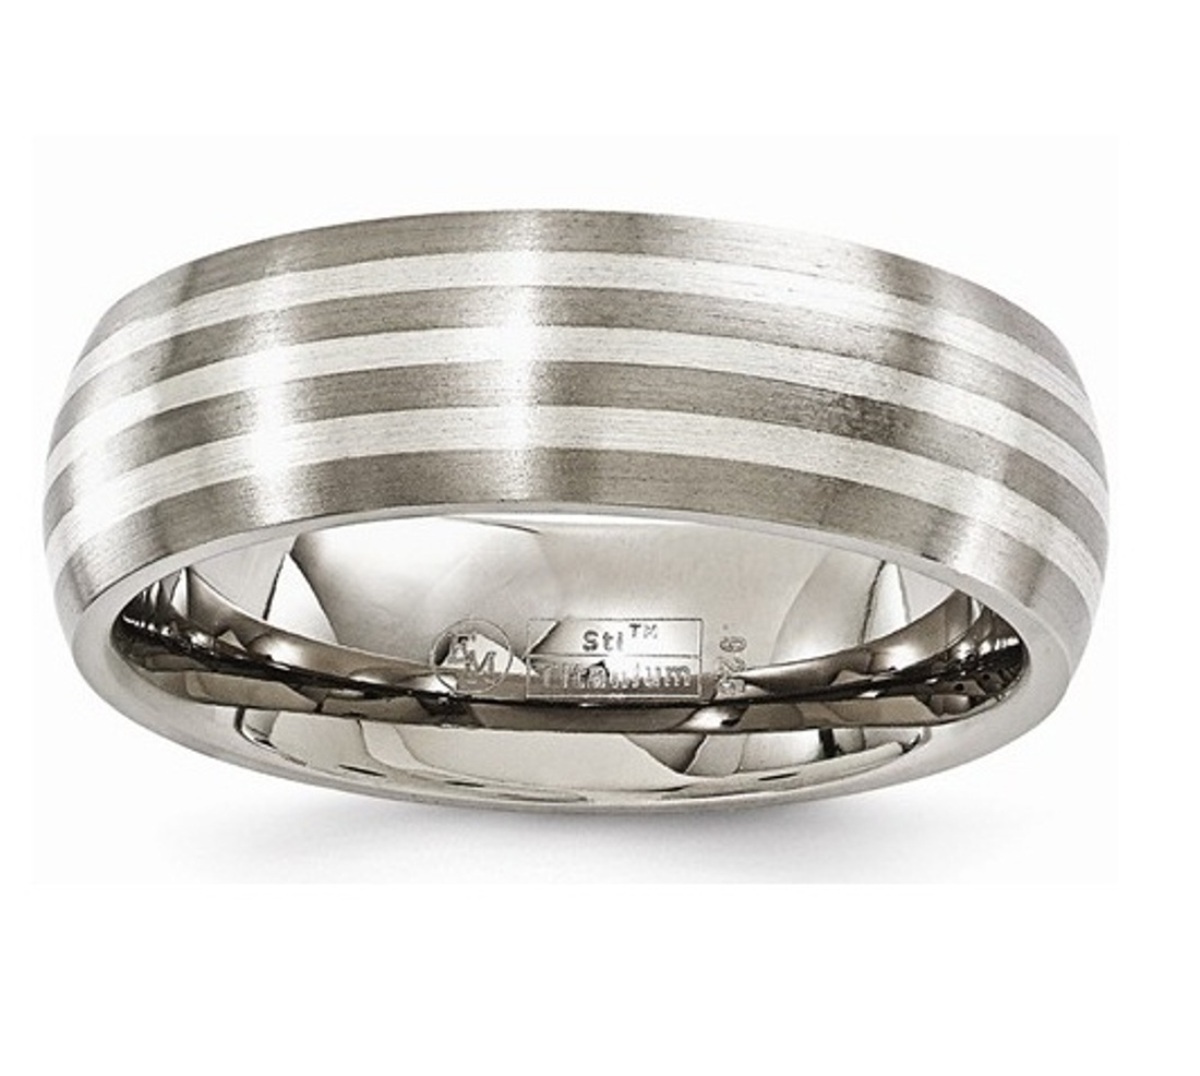  Titanium With Sterling Silver Inlay Brushed 7mm Band